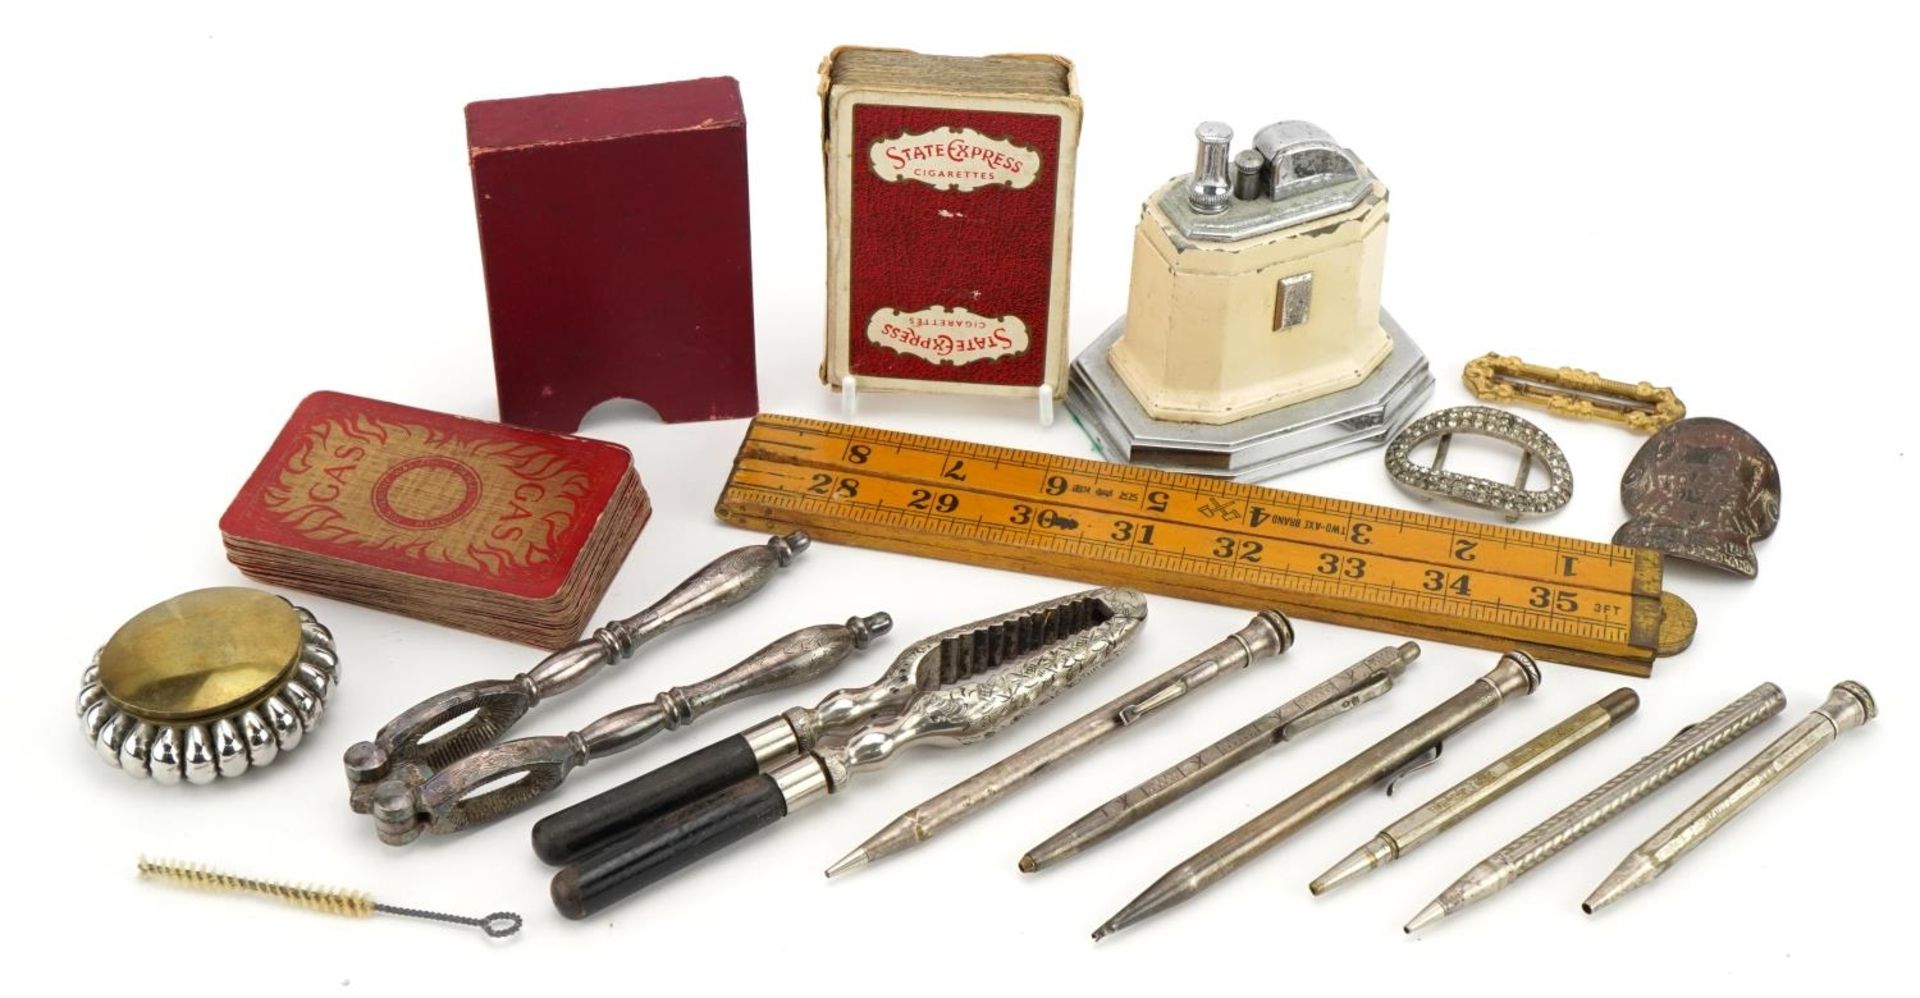 Objects and sundry items including an Art Deco enamelled table lighter, propelling pencils and